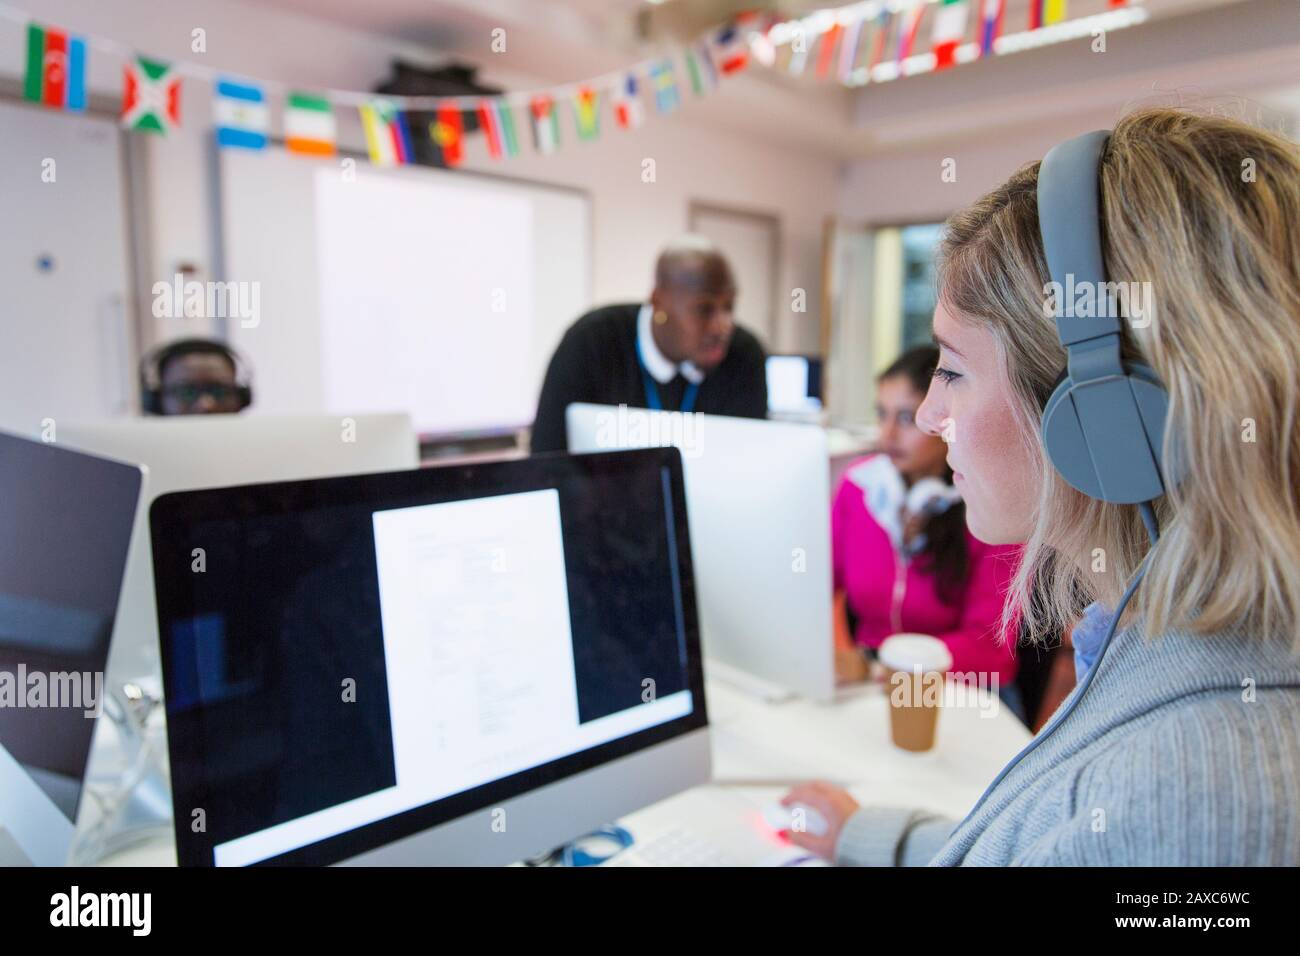 Female community college student with headphones using computer in computer lab classroom Stock Photo